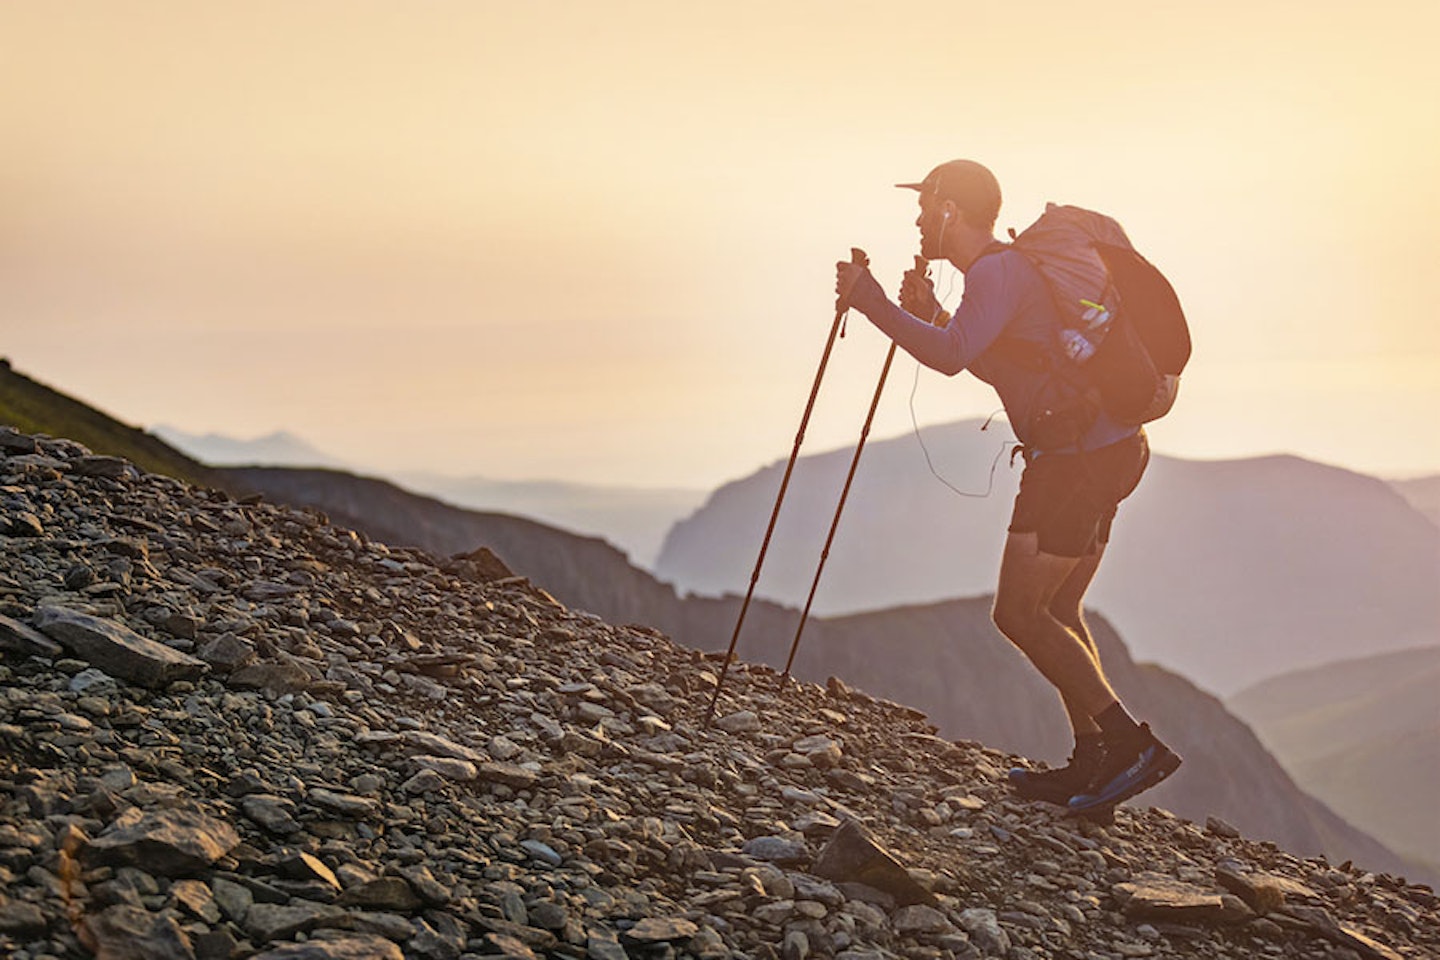 Man walking up a mountain in shorts and cap with headphones rucksack and trekking poles at sunset or sunrise